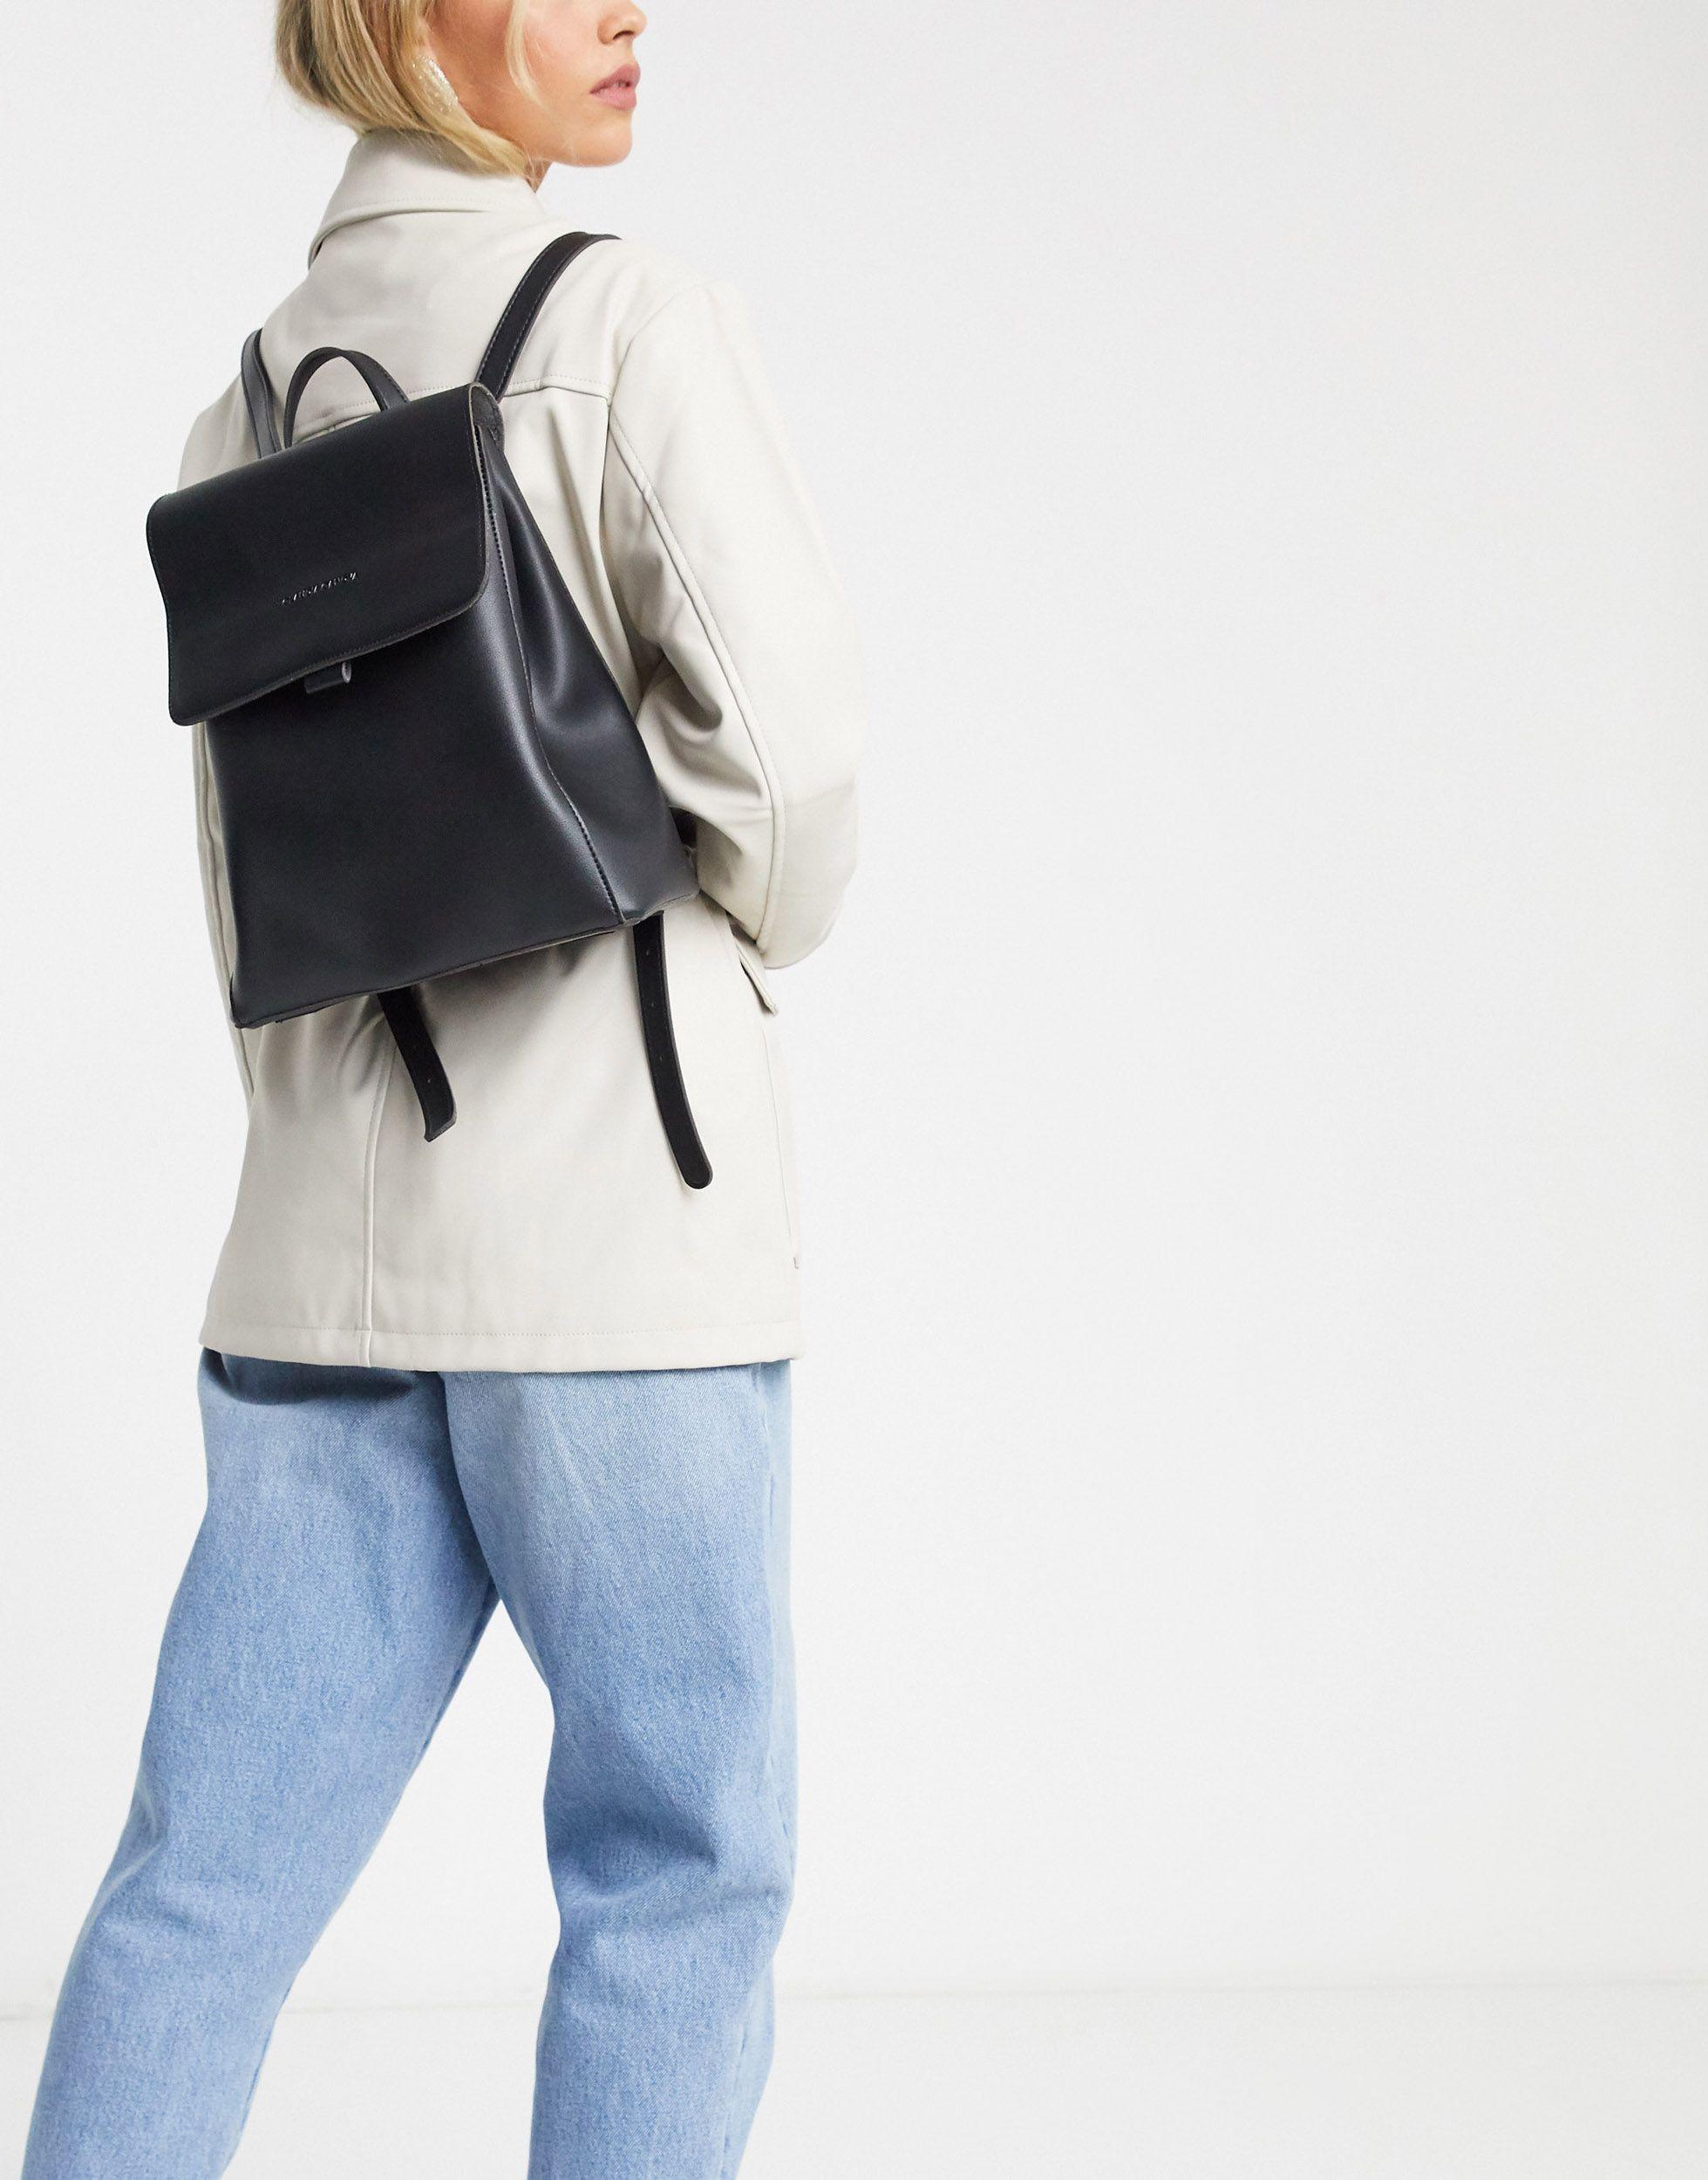 Claudia Canova Curved Backpack on Sale - anuariocidob.org 1690213511